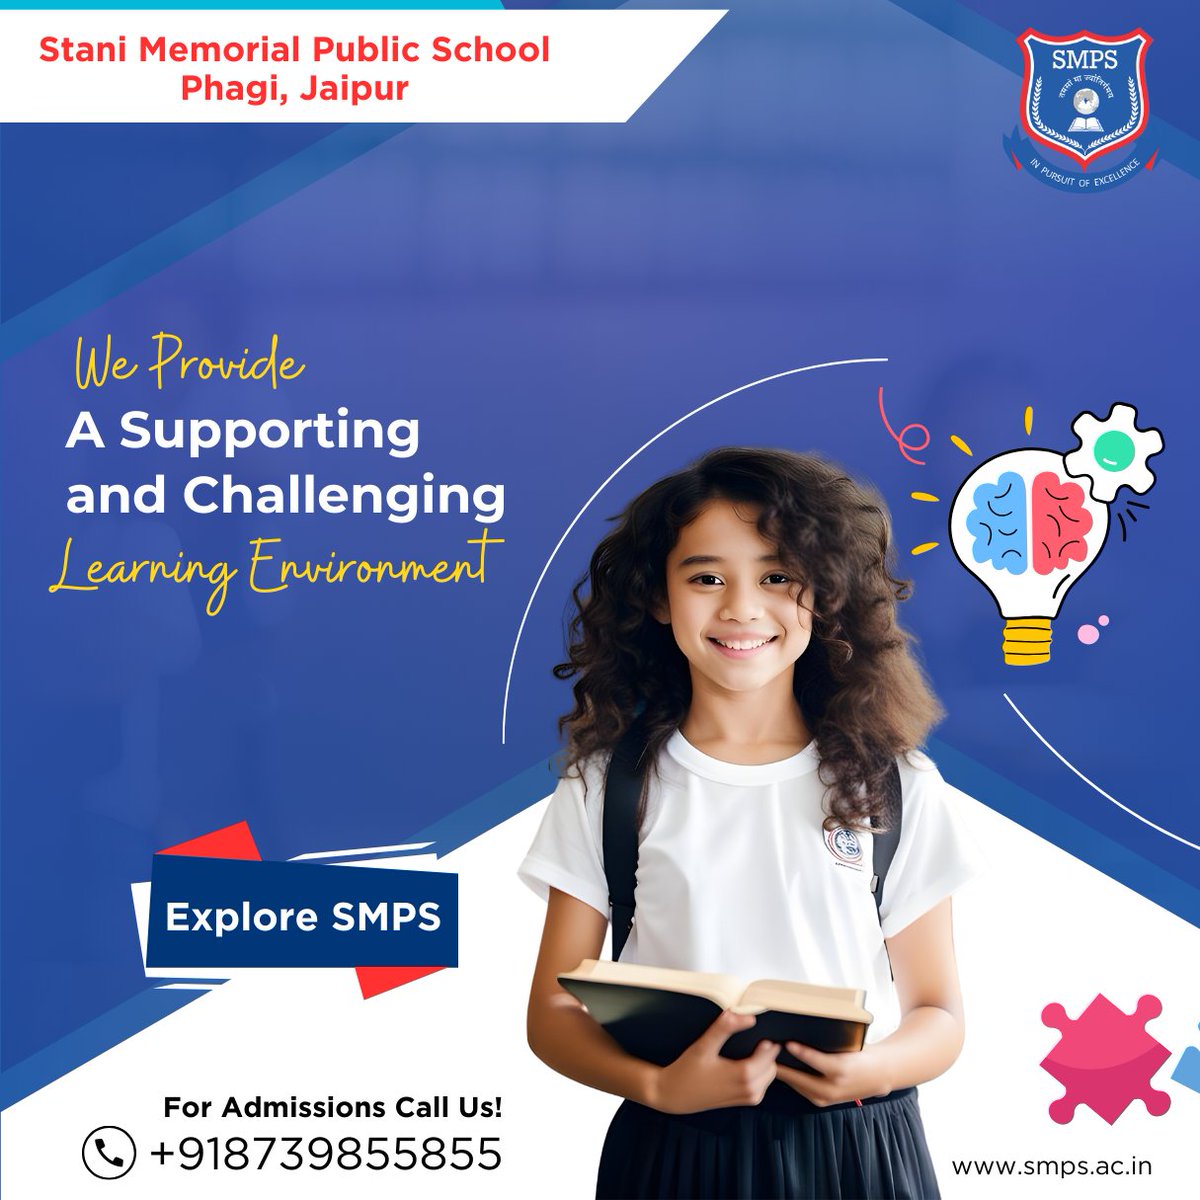 Join Stani Memorial Public School for a well-rounded education! 

Contact us at +91-141-2973793 | smps@iirm.ac.in. | smps.ac.in

#SMPS #QualityEducation #SchoolLife #SMPSPhagi #JaipurSchools #KidsLearning #TopSchoolJaipur #ChildrensEducation #BestSchoolJaipur